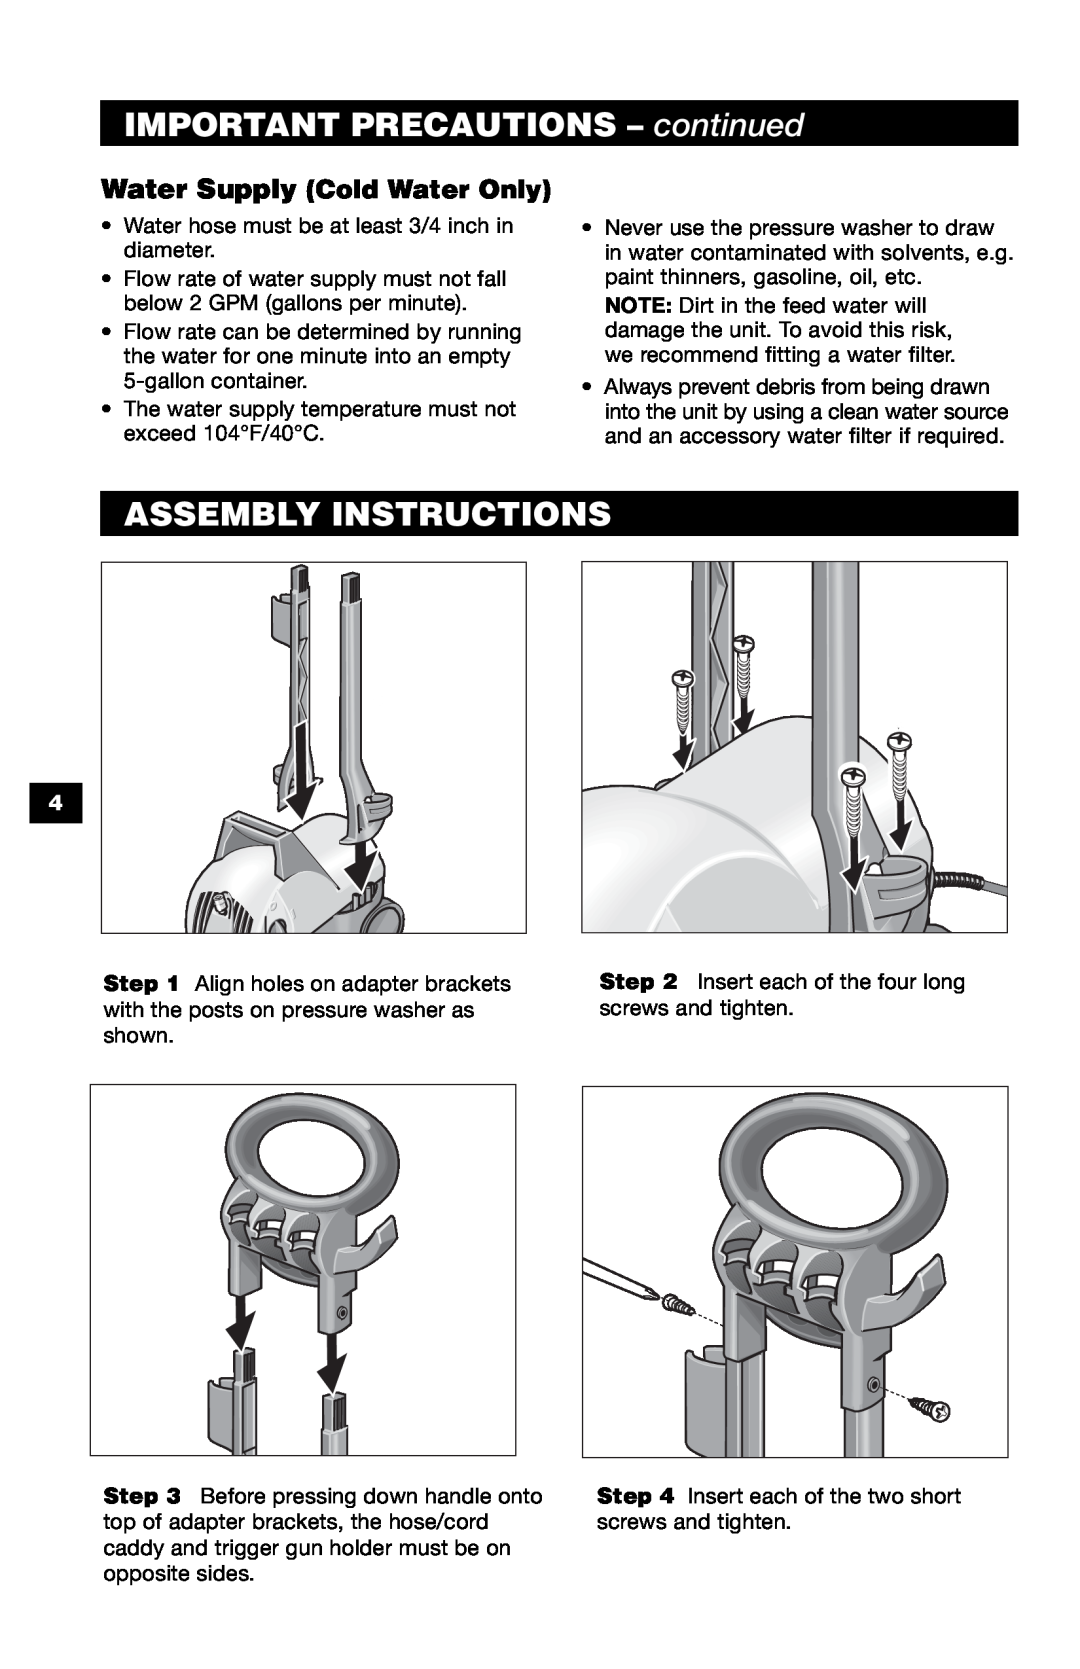 Karcher K 390 M specifications IMPORTANT PRECAUTIONS - continued, Assembly Instructions, Water Supply Cold Water Only 